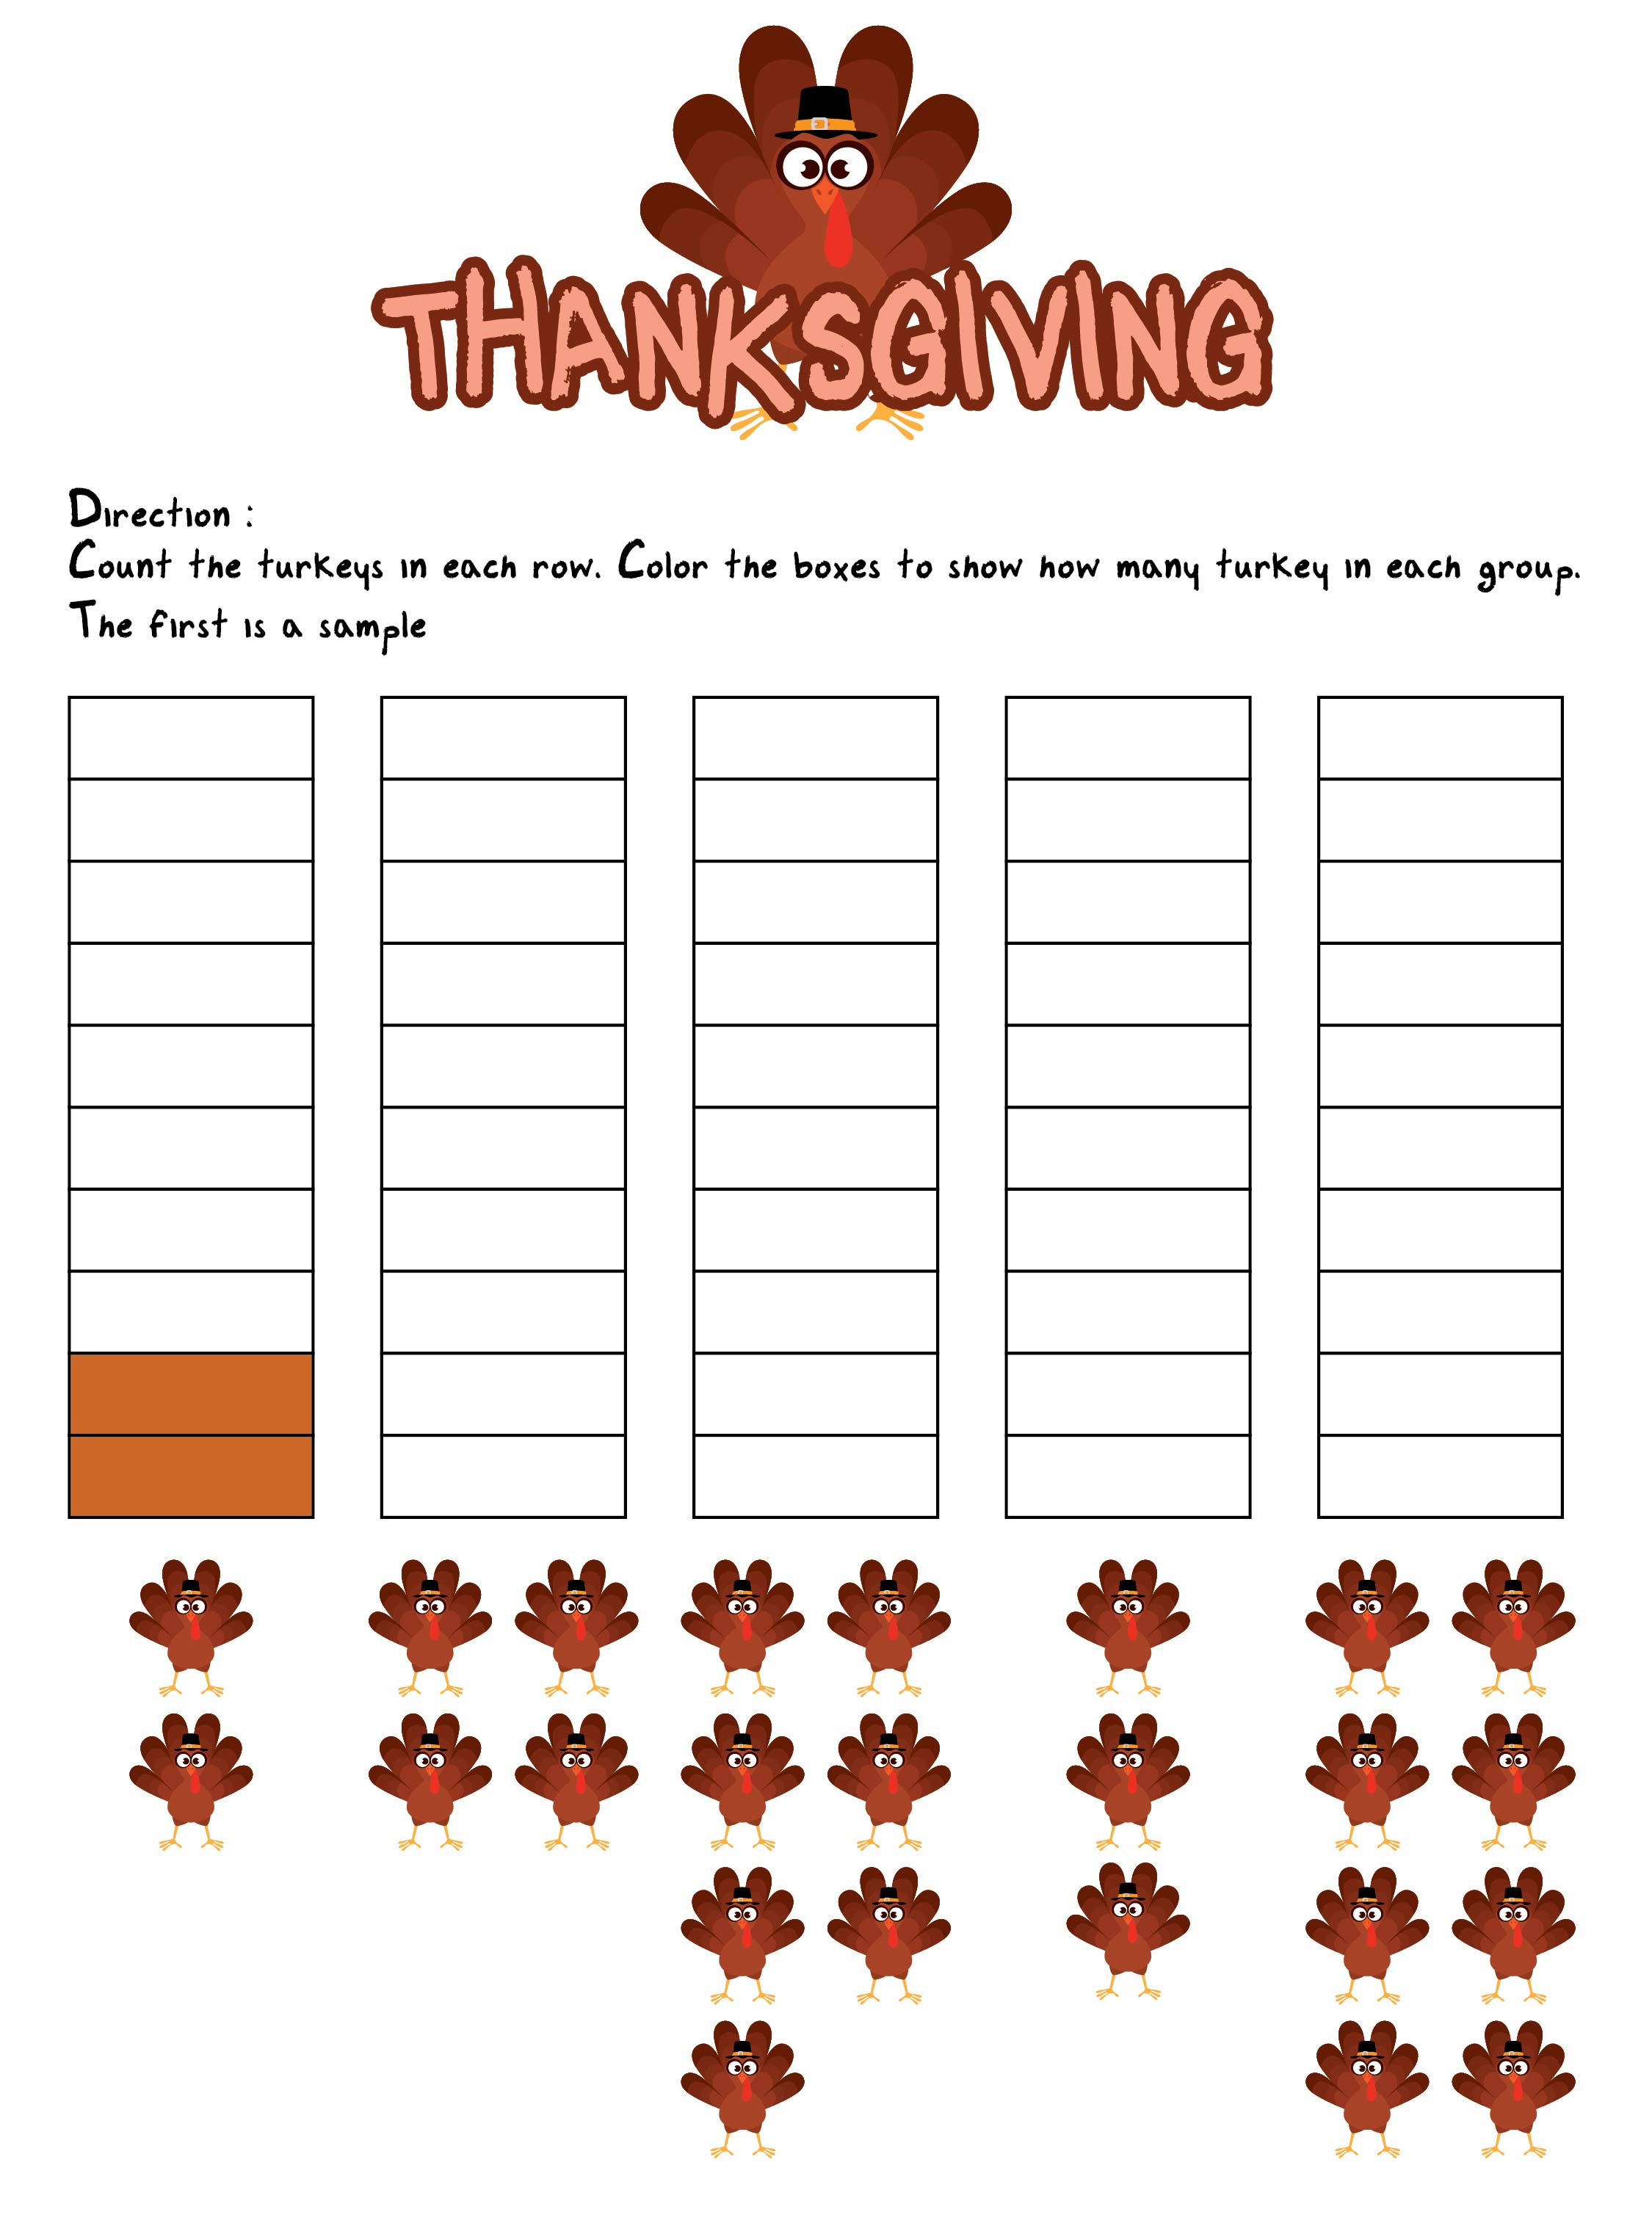 Thanksgiving Printable Images Gallery Category Page 3 Printablee